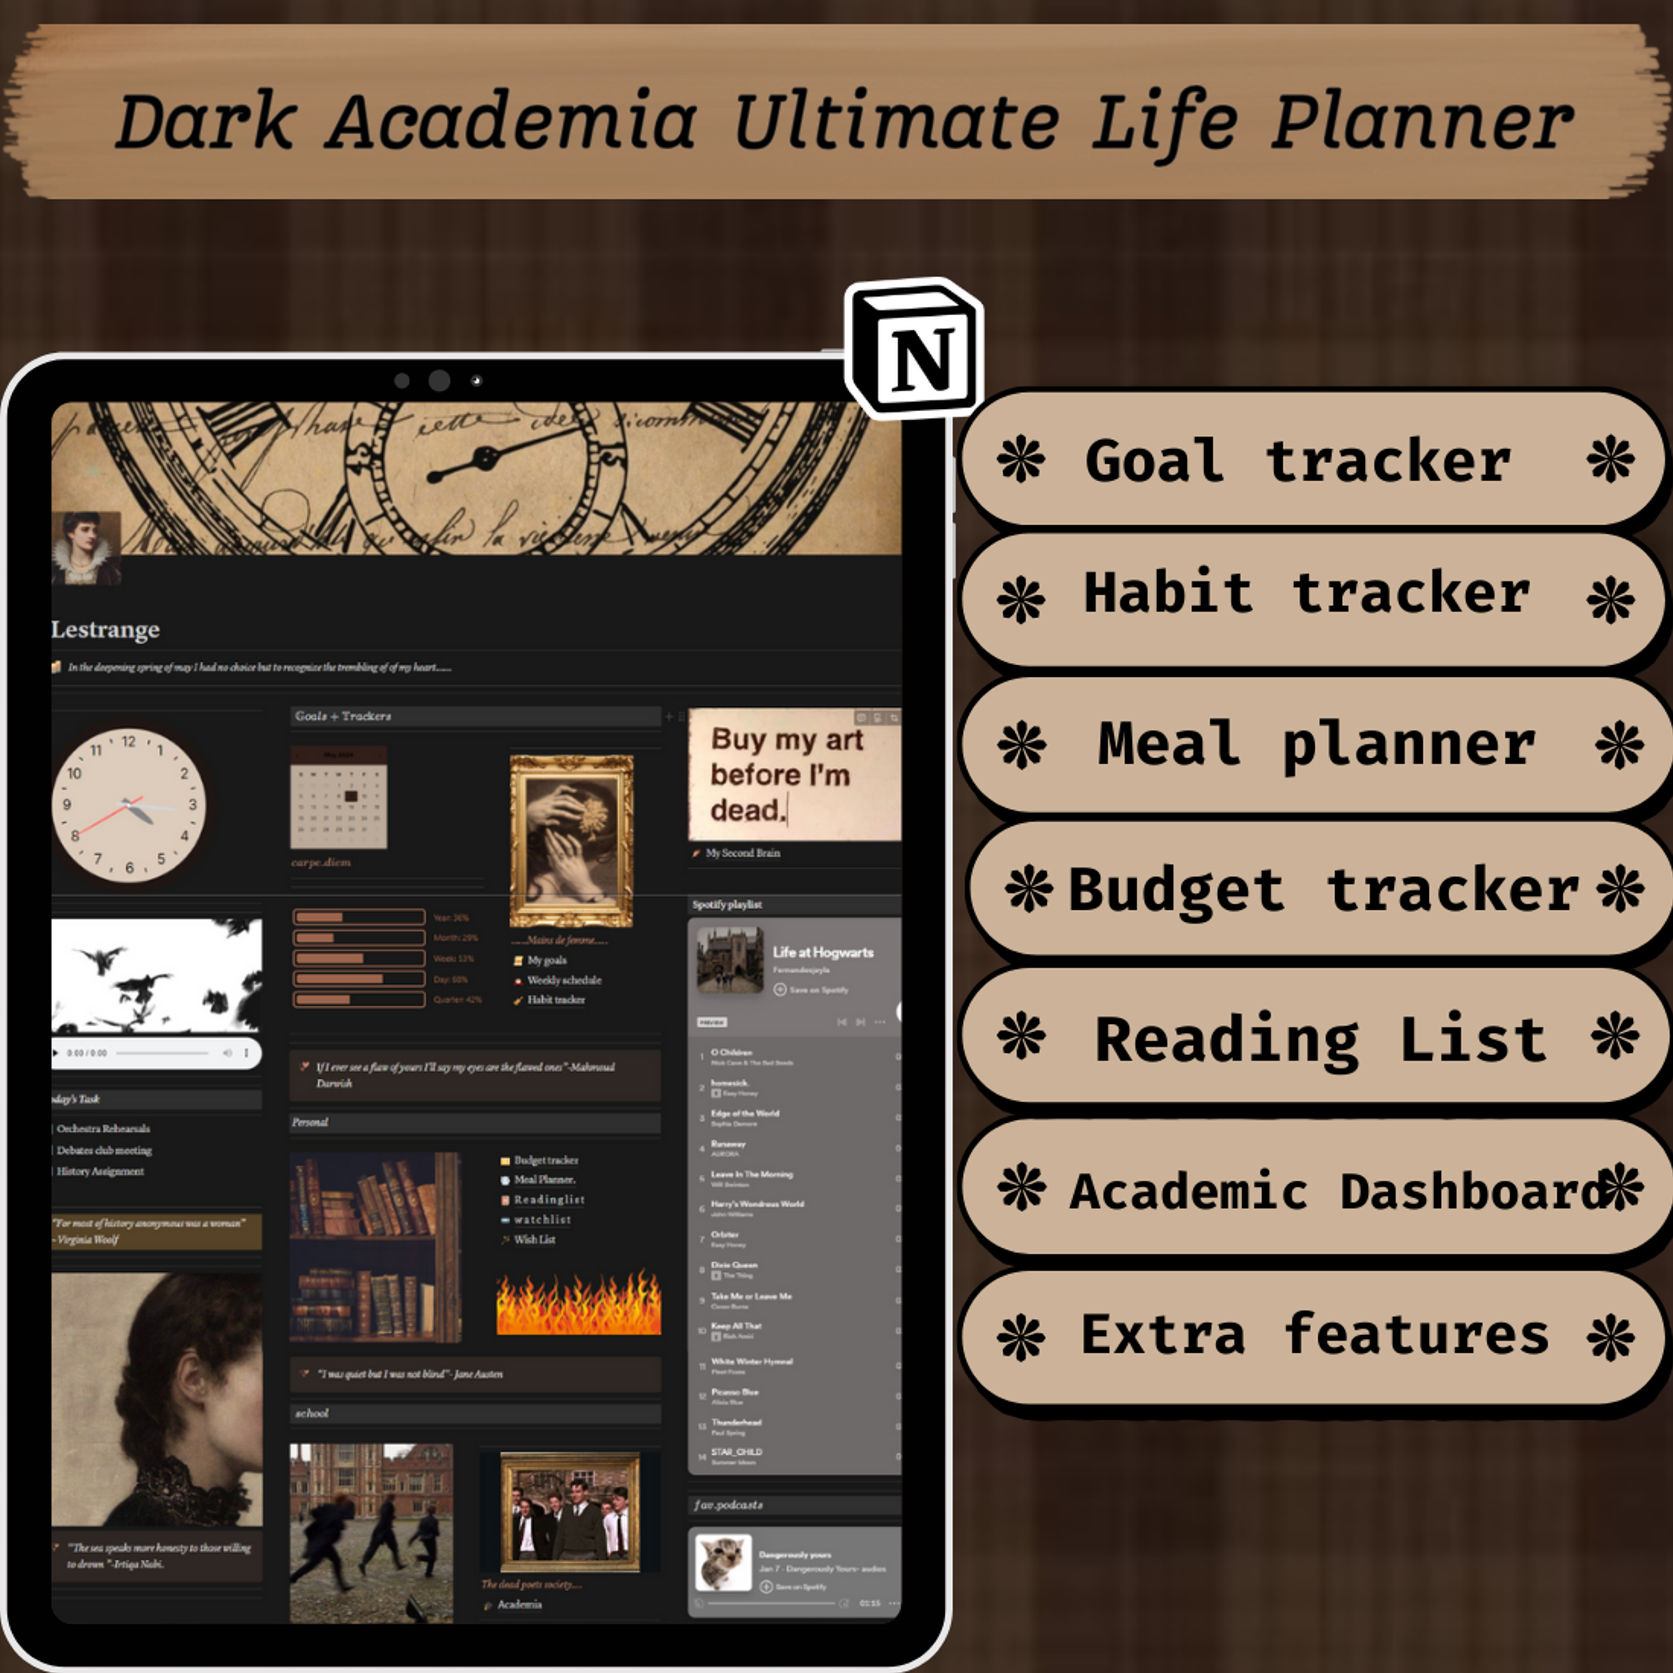 Dark Academia Ulimate Life Planner cover image.